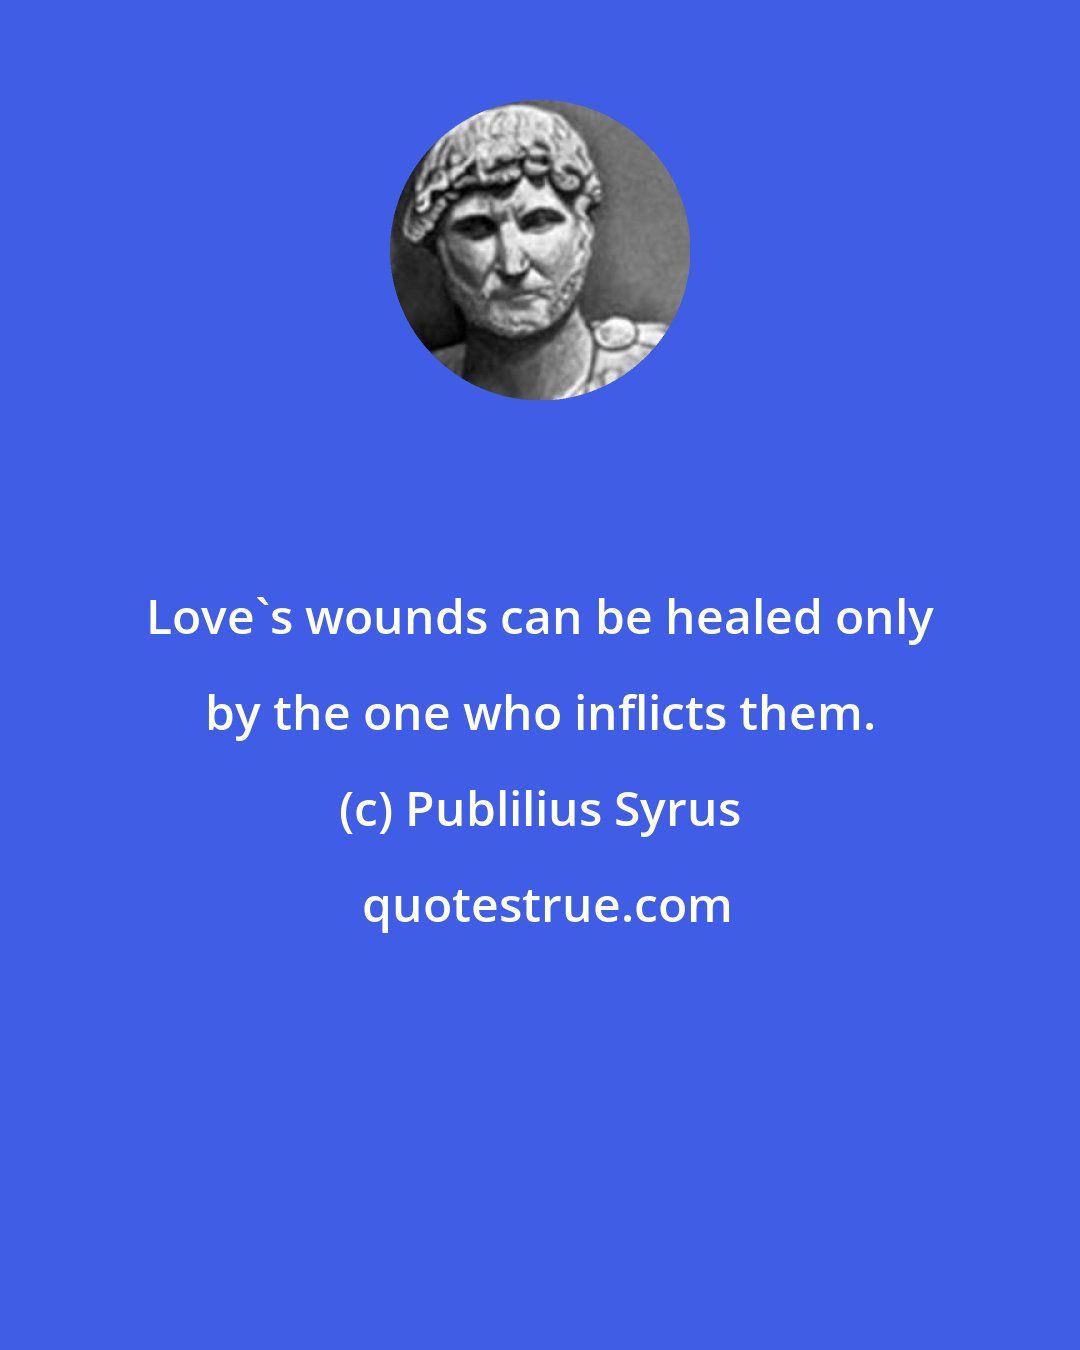 Publilius Syrus: Love's wounds can be healed only by the one who inflicts them.